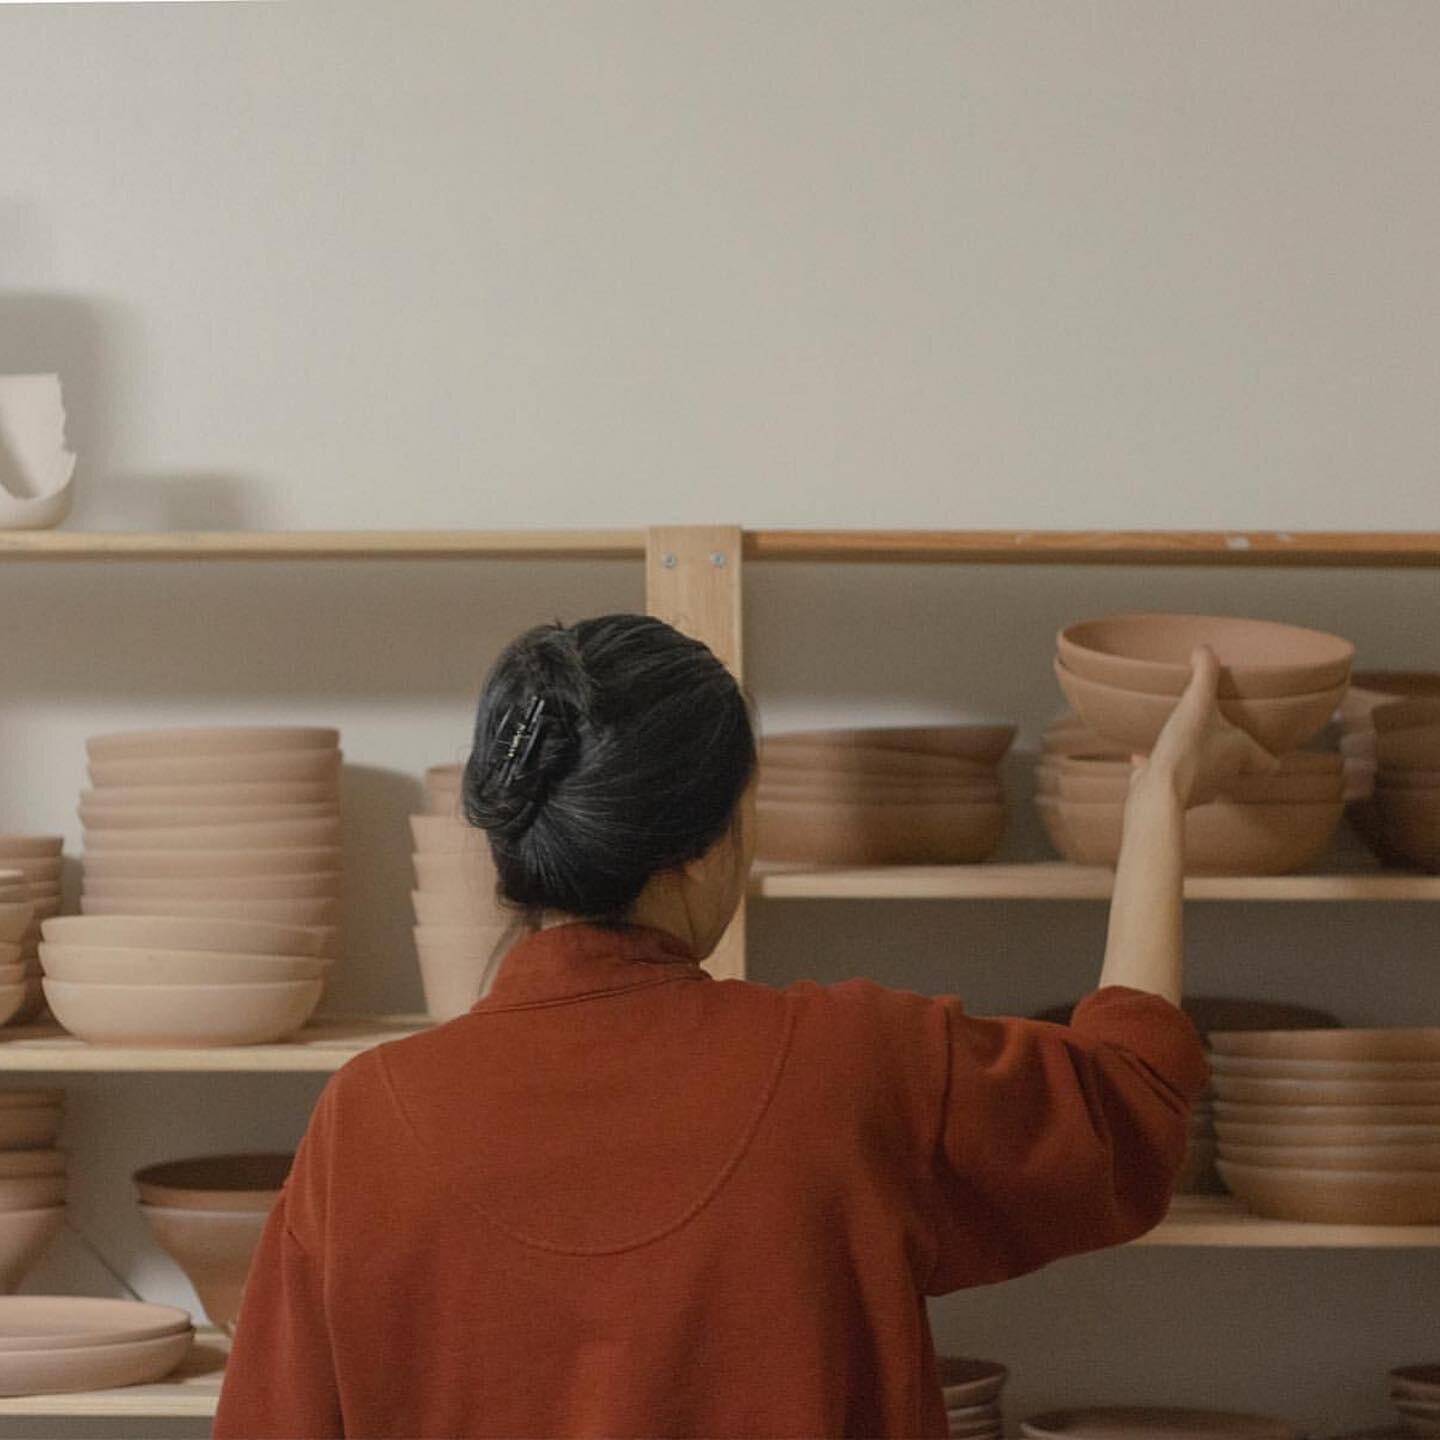 Ready to upgrade your household wares? We&rsquo;re excited to feature @someceramics joining #FADMarket this weekend @theinvisibledog.

Founded by Candice Aquino, this #womanowned ceramics studio provides the best new additions to your home - from bow